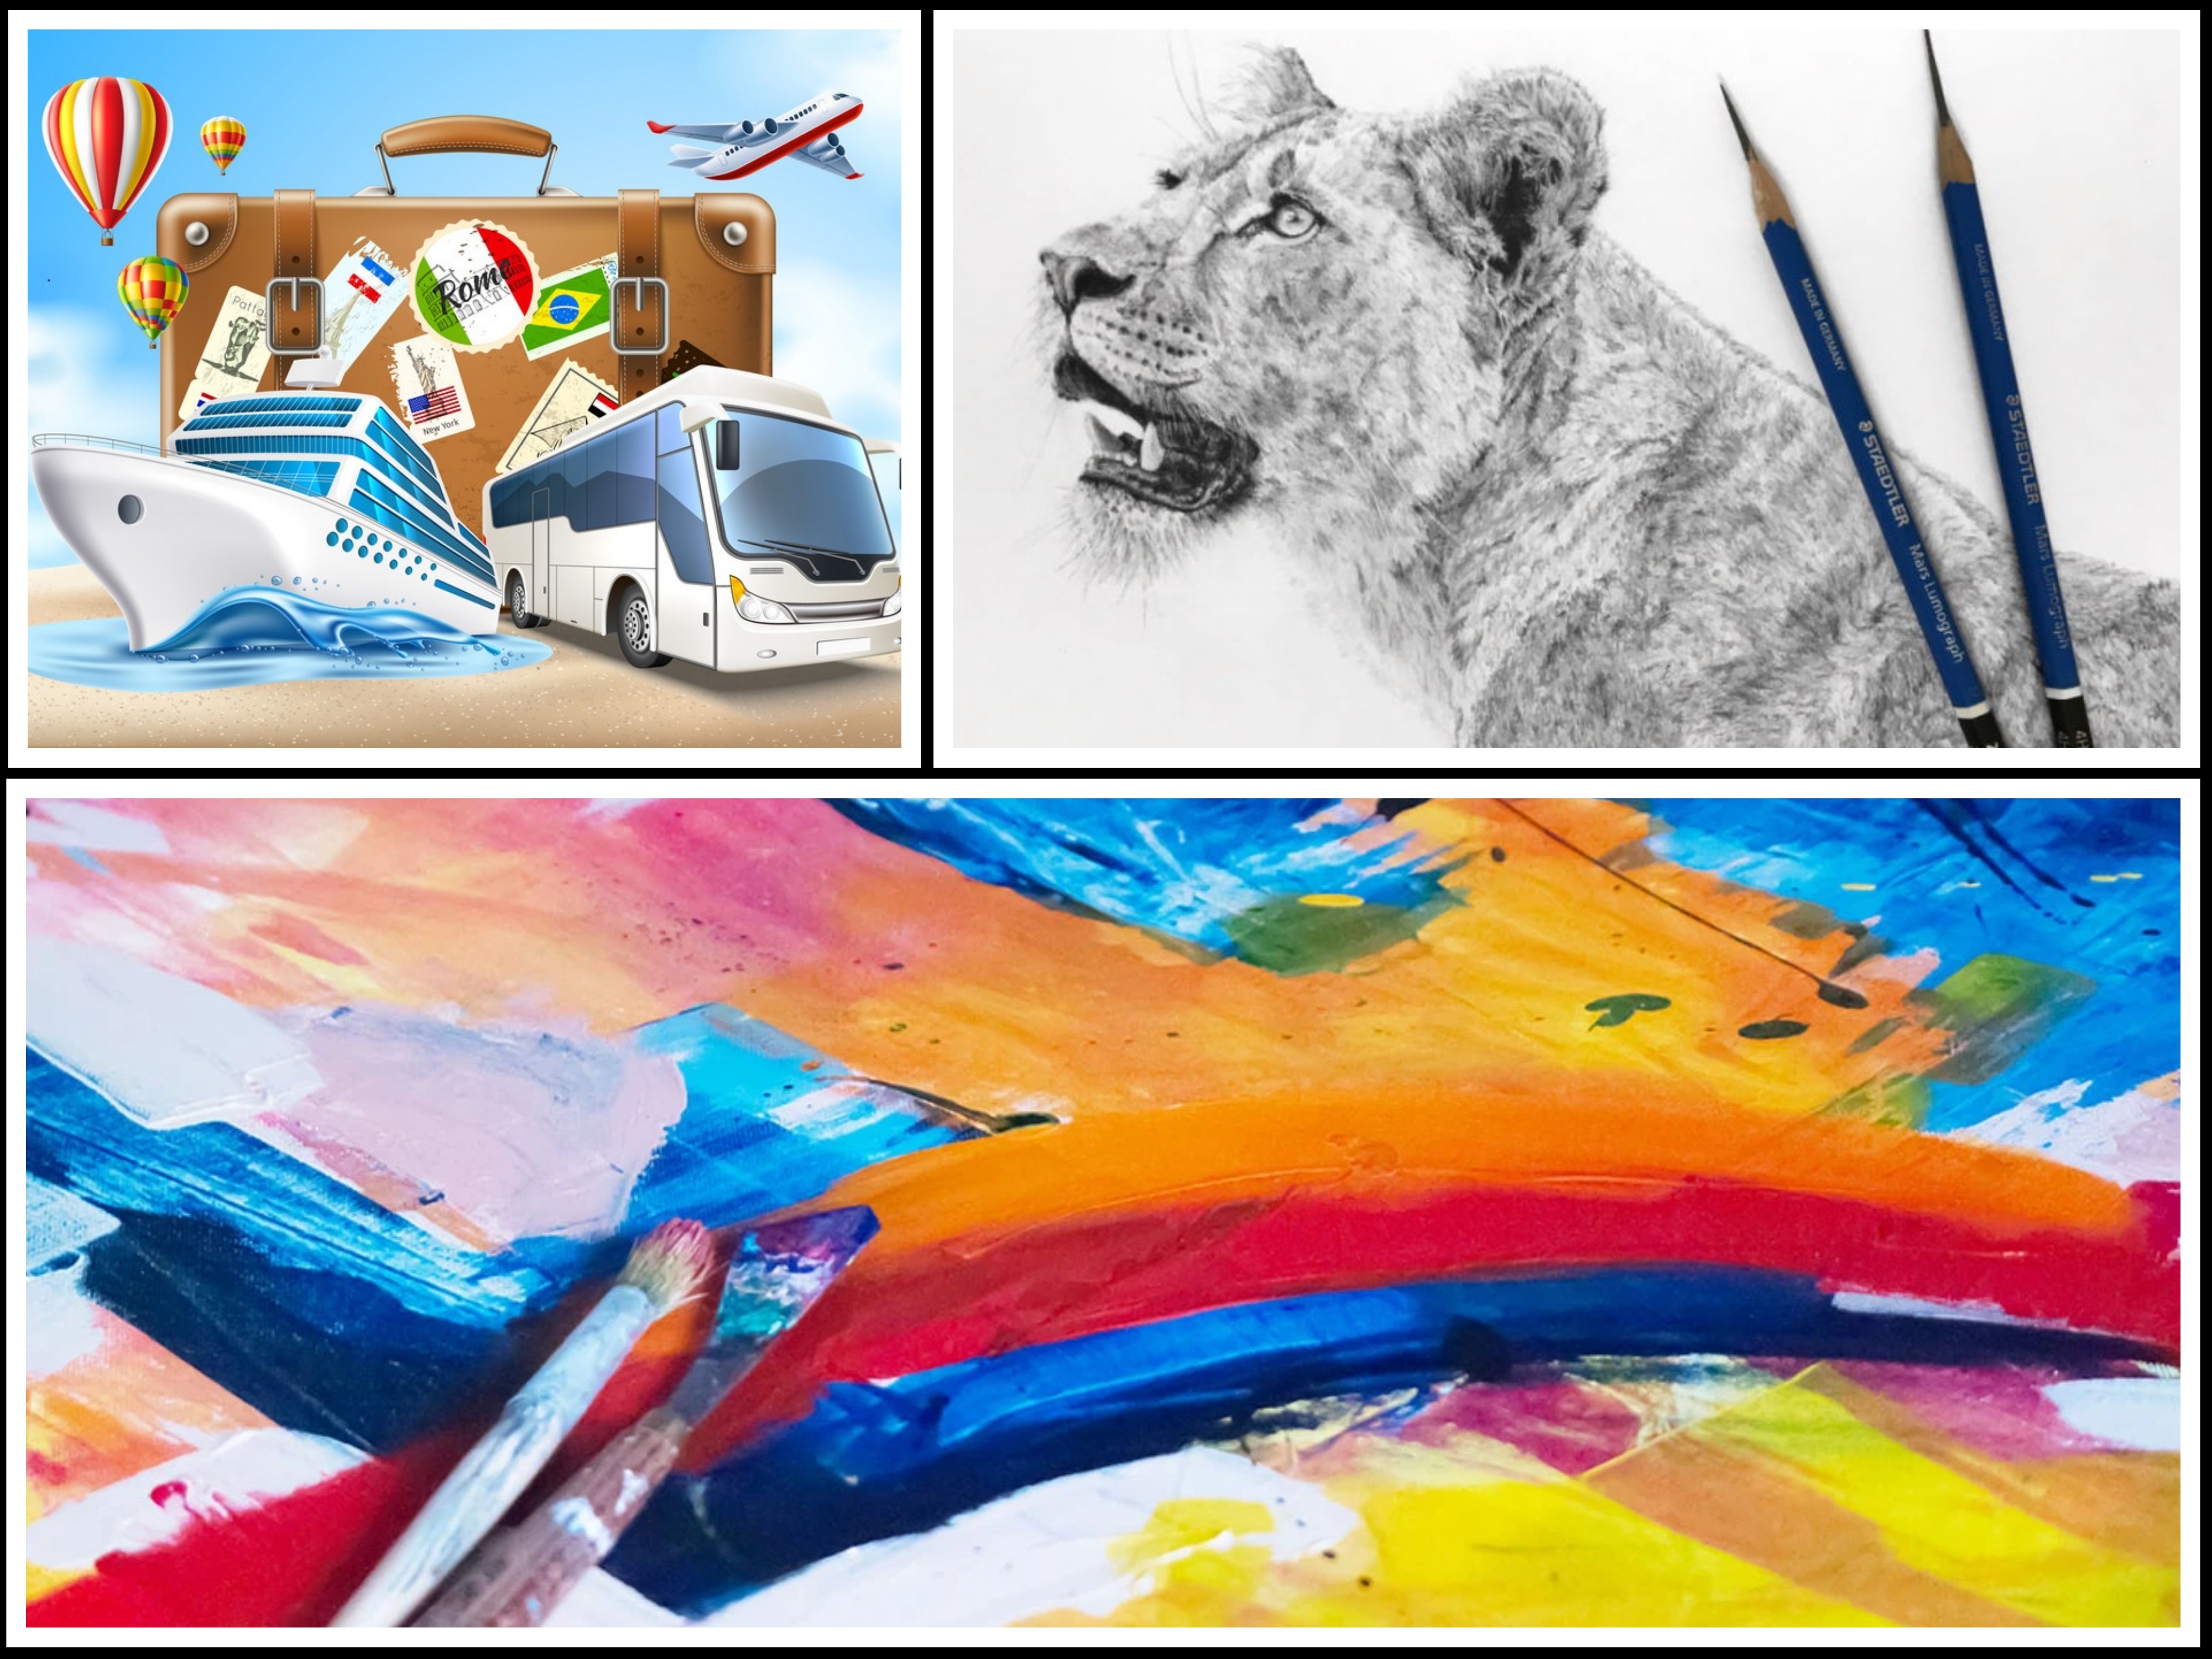 Painting, Pencil Sketching & Travel